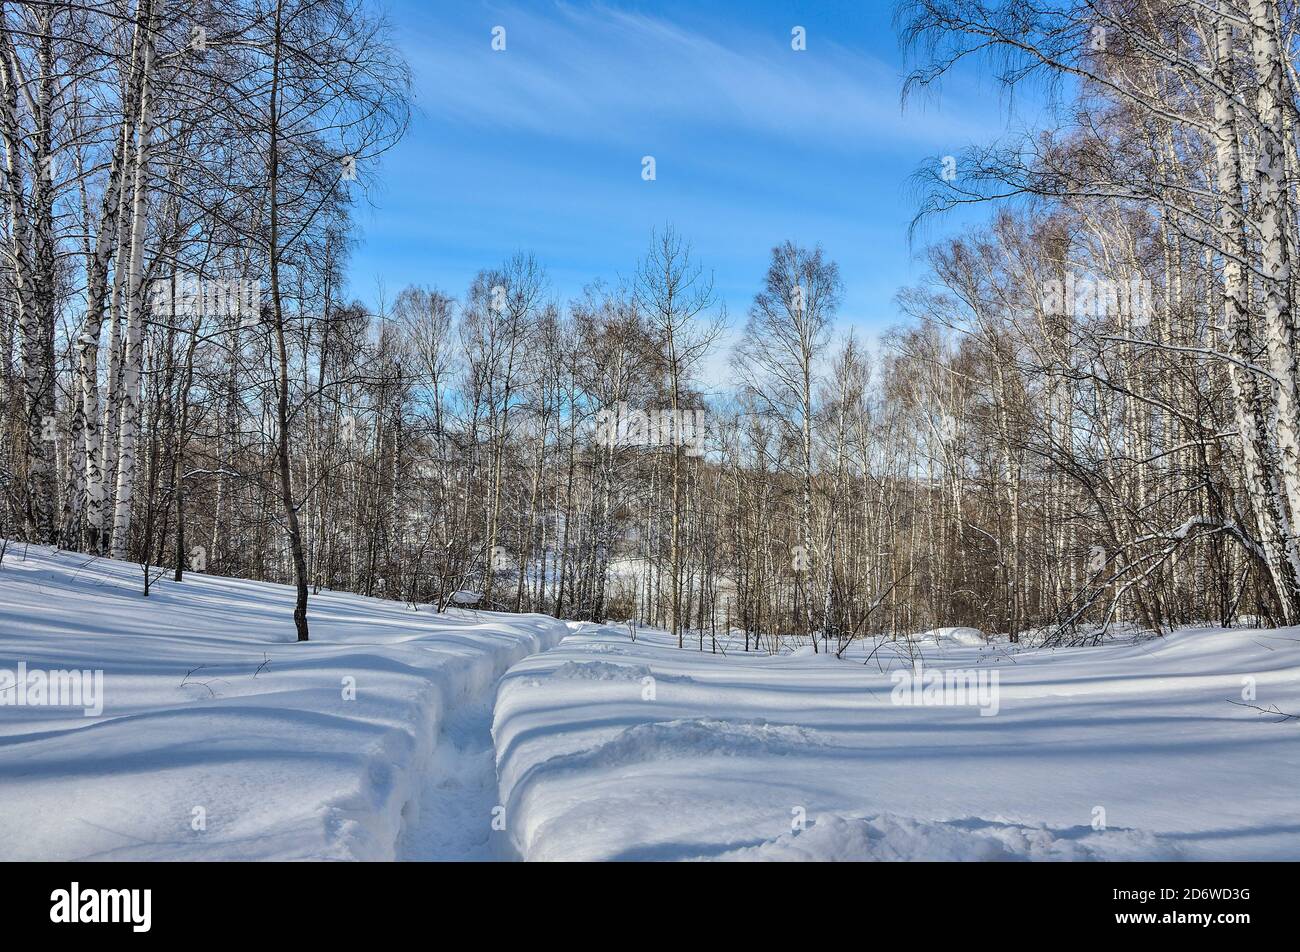 Wonderful winter landscape - narrow path in deep snow leading to birch forest. White clear snow, white birch trunks with sunlight illuminated on brigh Stock Photo